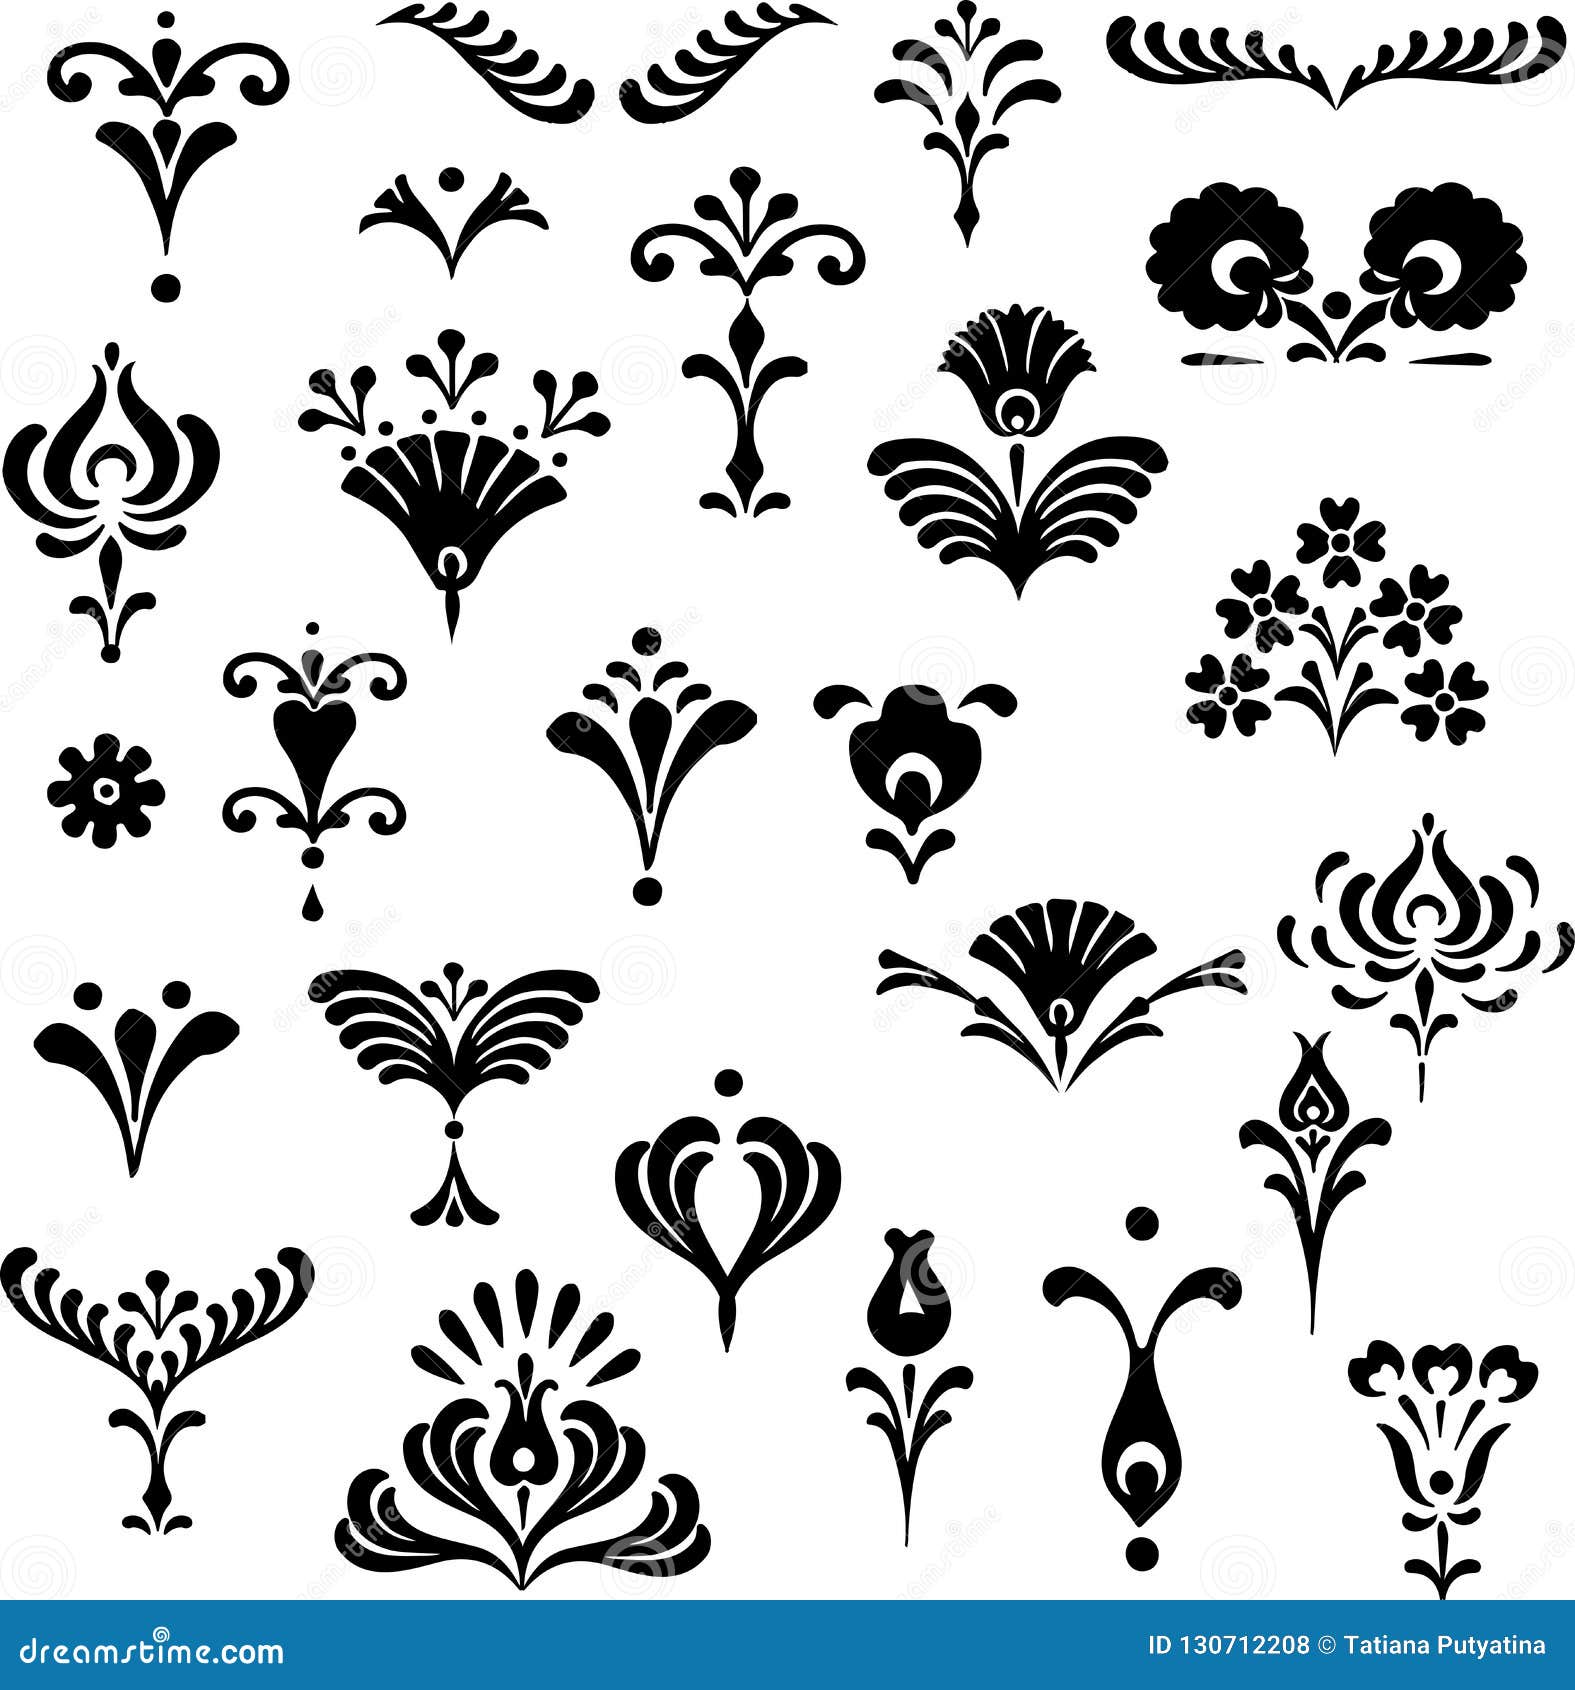 Set of vector graphic elements for design. Set of floral elements vector. Hungarian motifs.